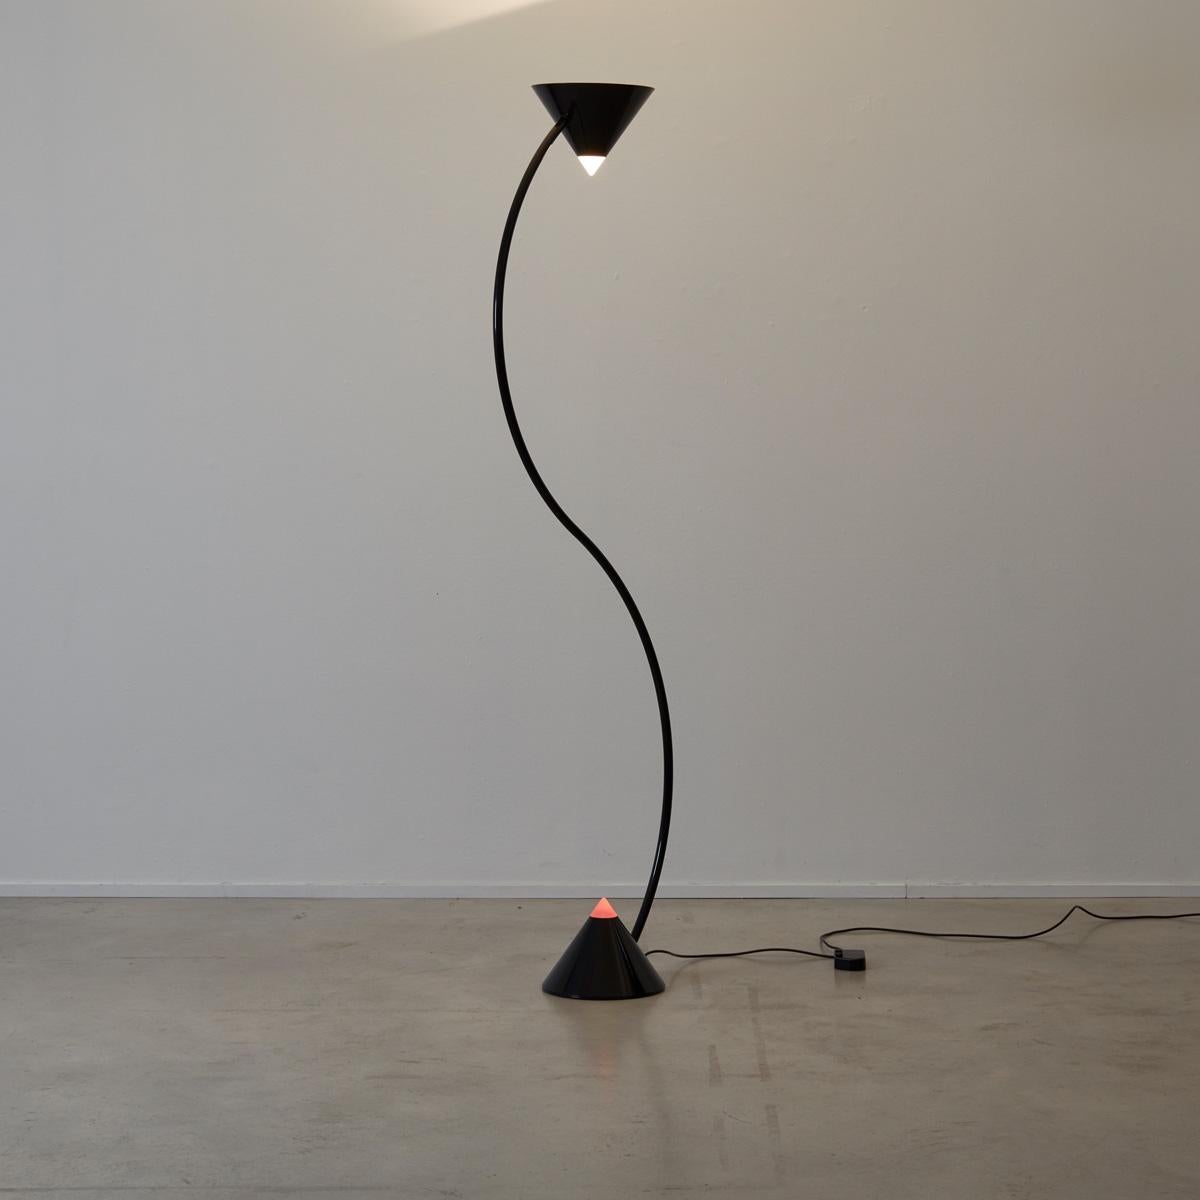 Gary Morga, designer of the Yang lamp, was born in Edinburgh, Scotland in 1956. He studied Silversmithing and Metalwork at Camberwell School of Arts and Crafts, London. In 1986 he was invited to submit designs for the Memphis Milano Lights